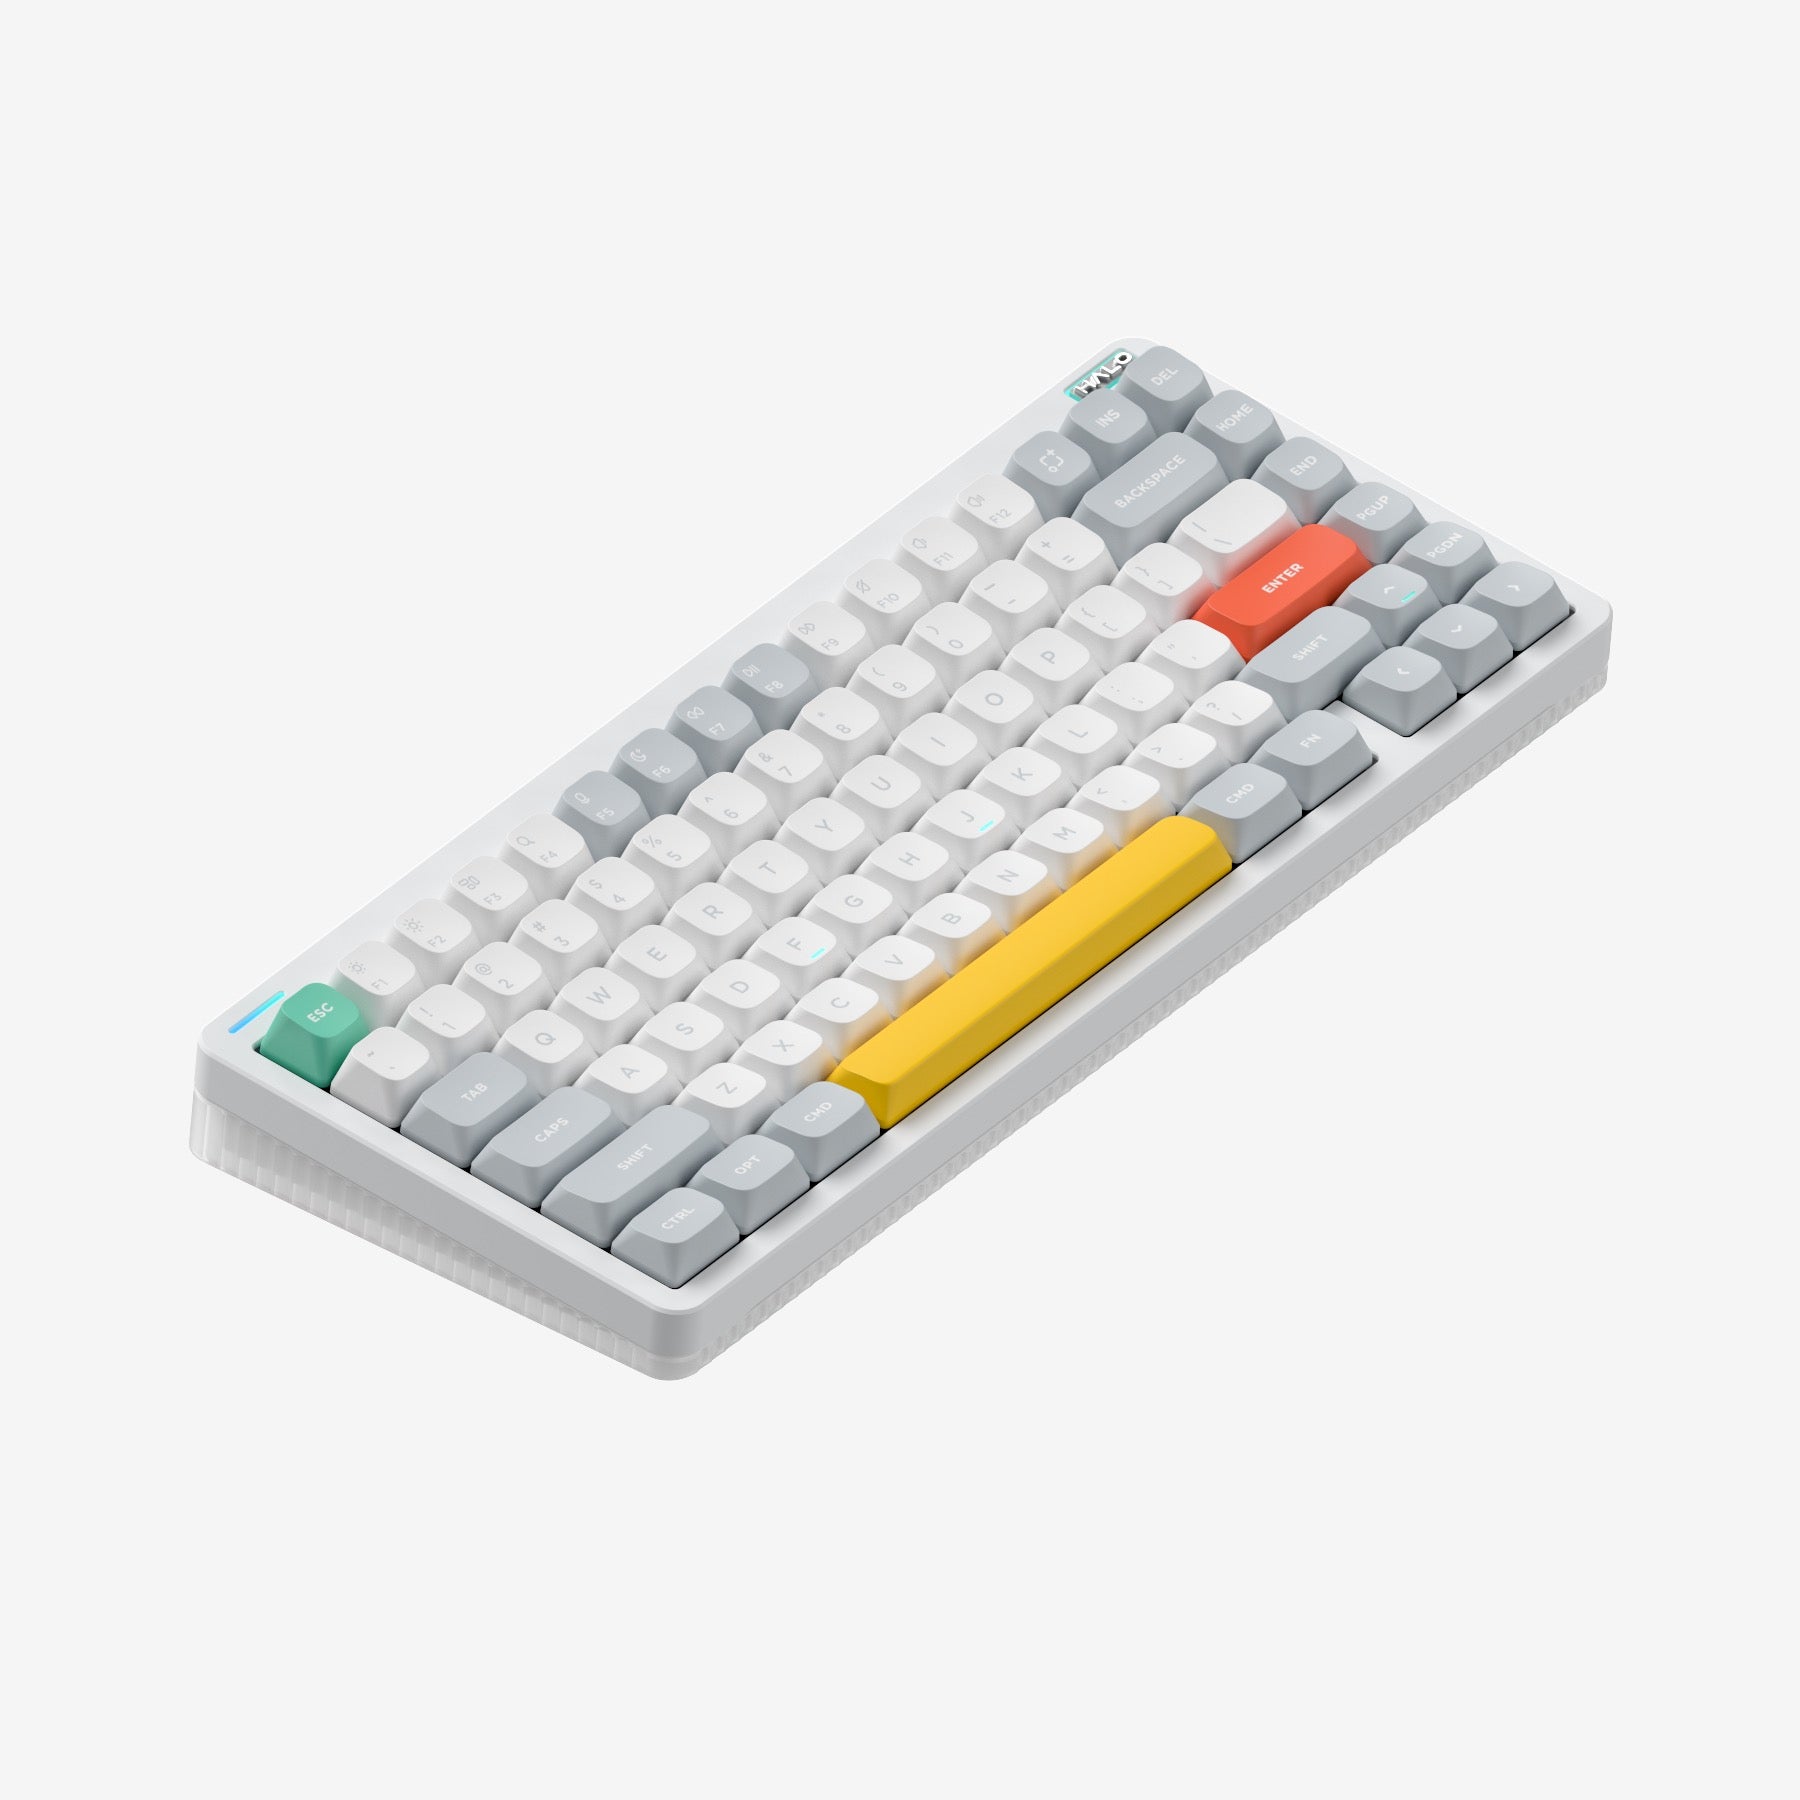 Ionic White / Raspberry (46gf) / Not Included